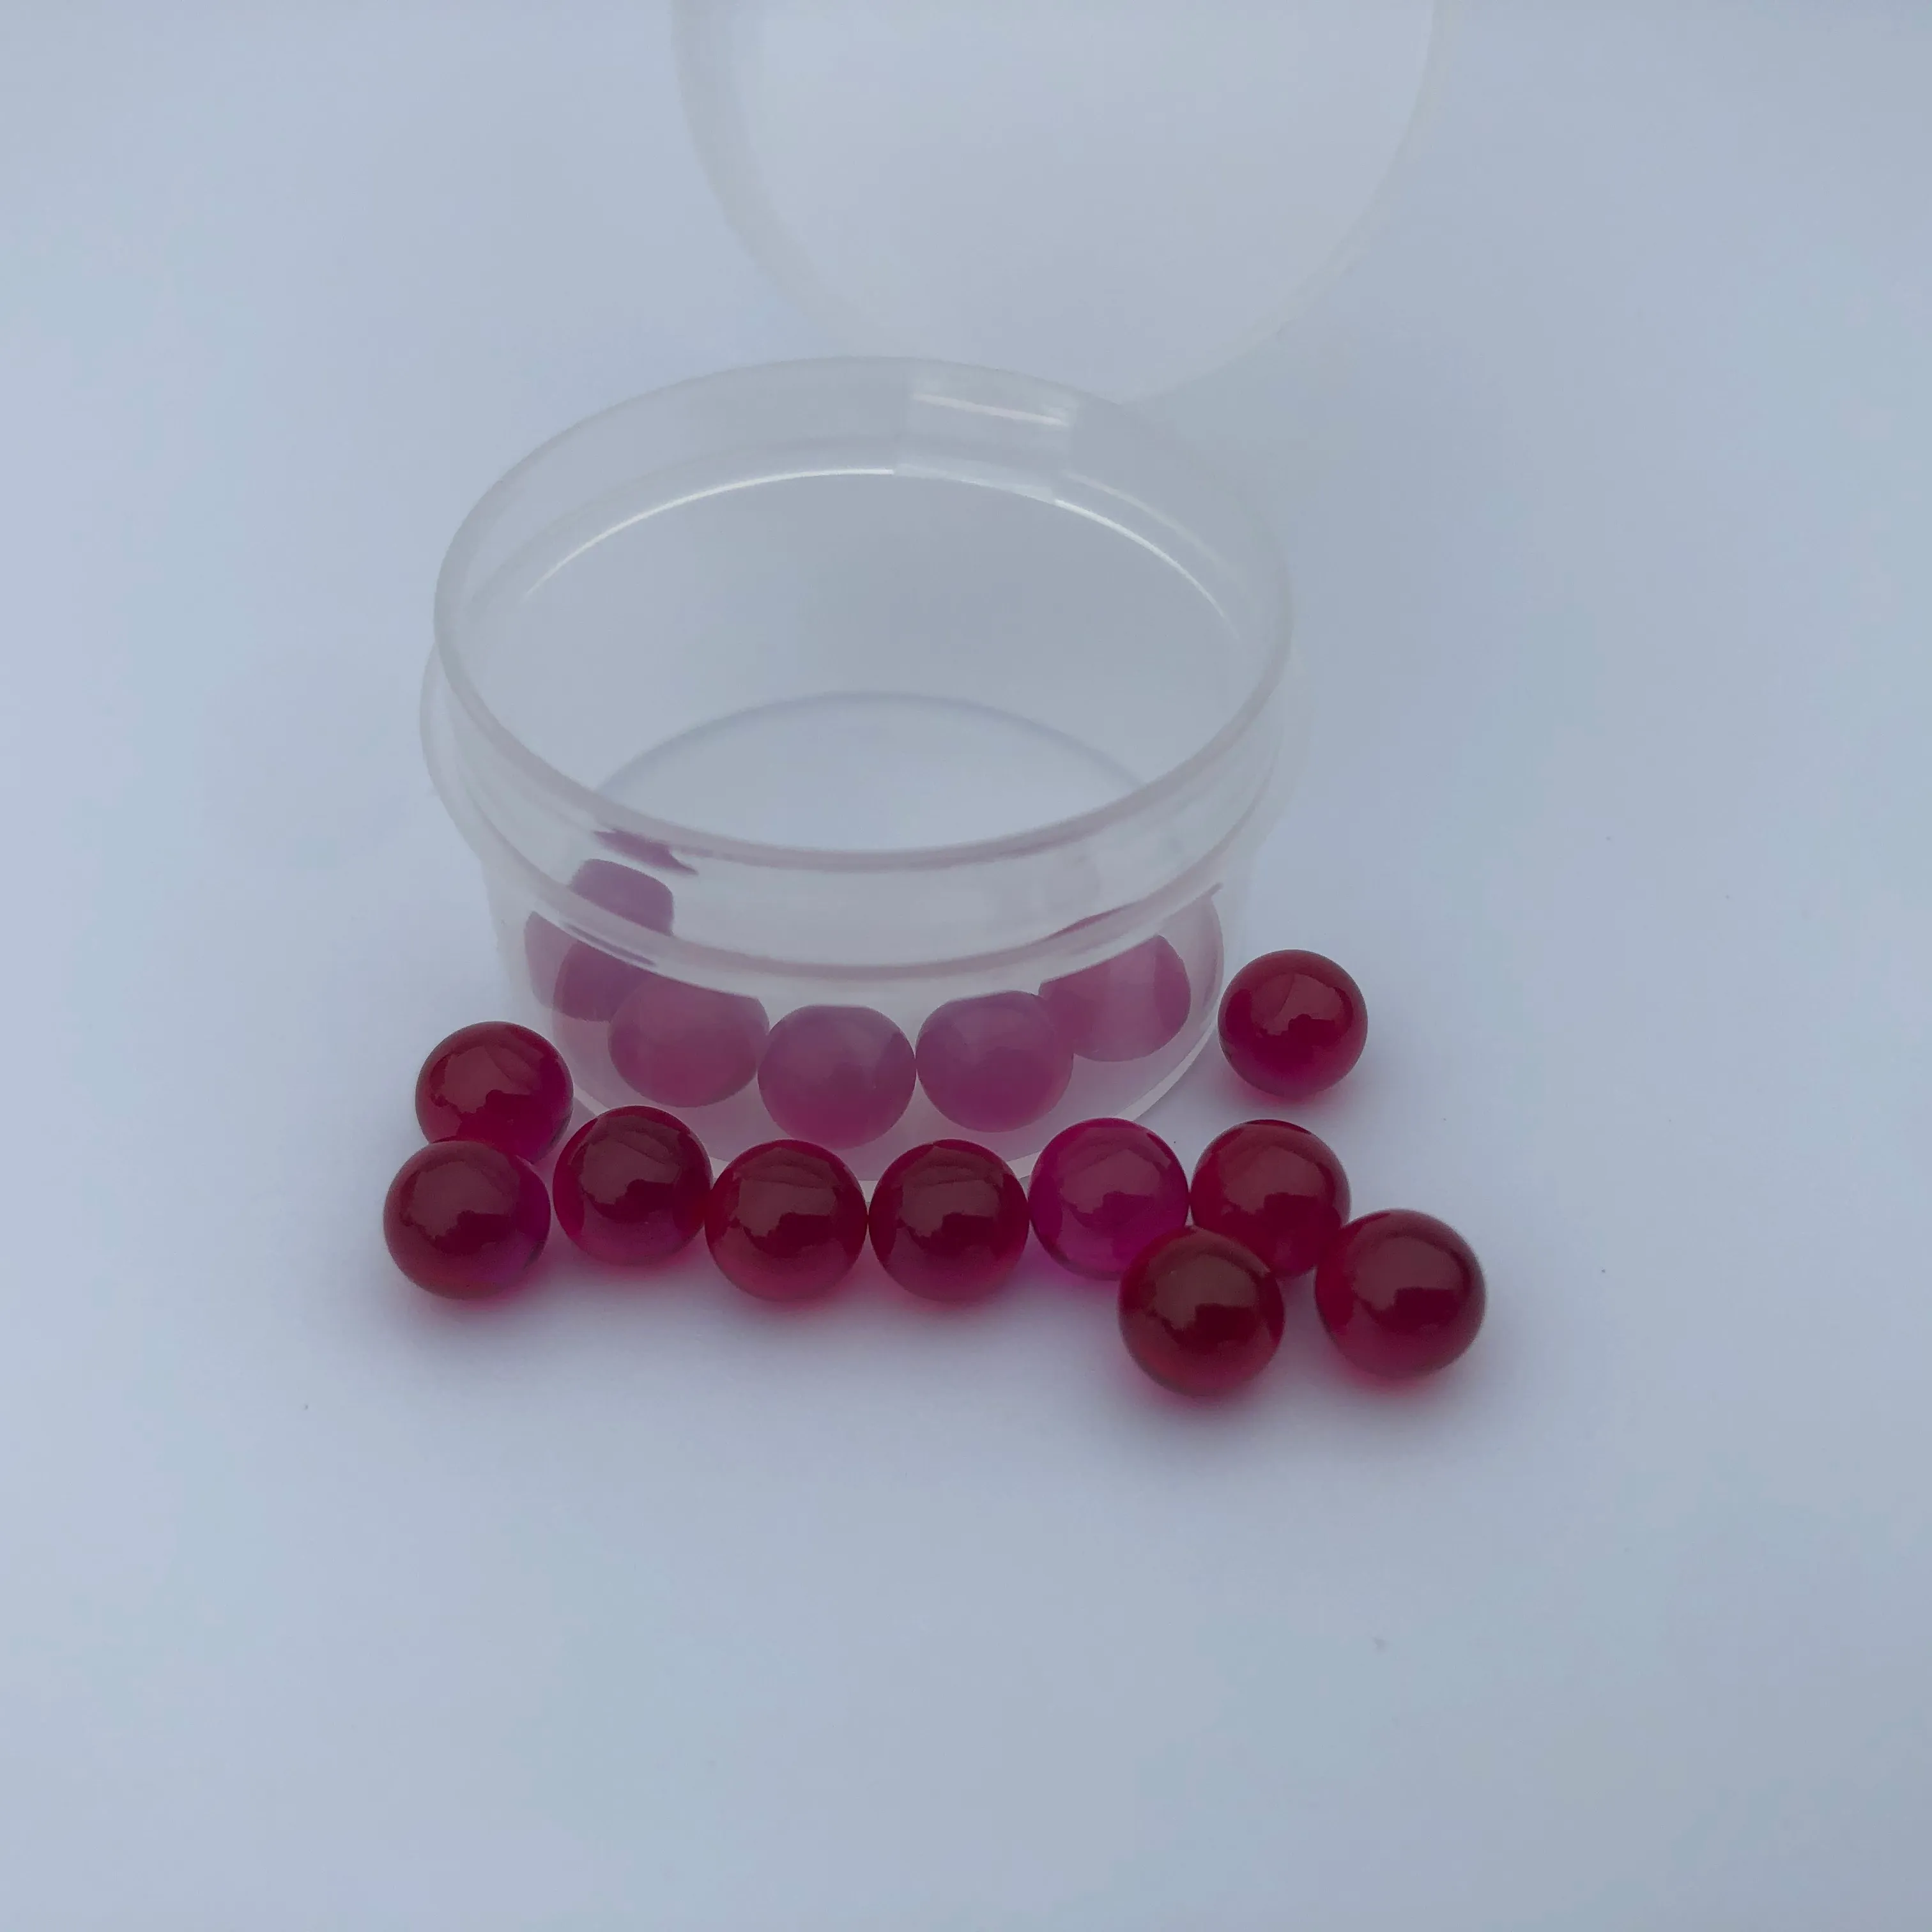 6mm Ruby Ball Terp Pearl Dab Pearl Insert Red Color For 25mm 30mm Quartz Banger Nails Glass Bongs